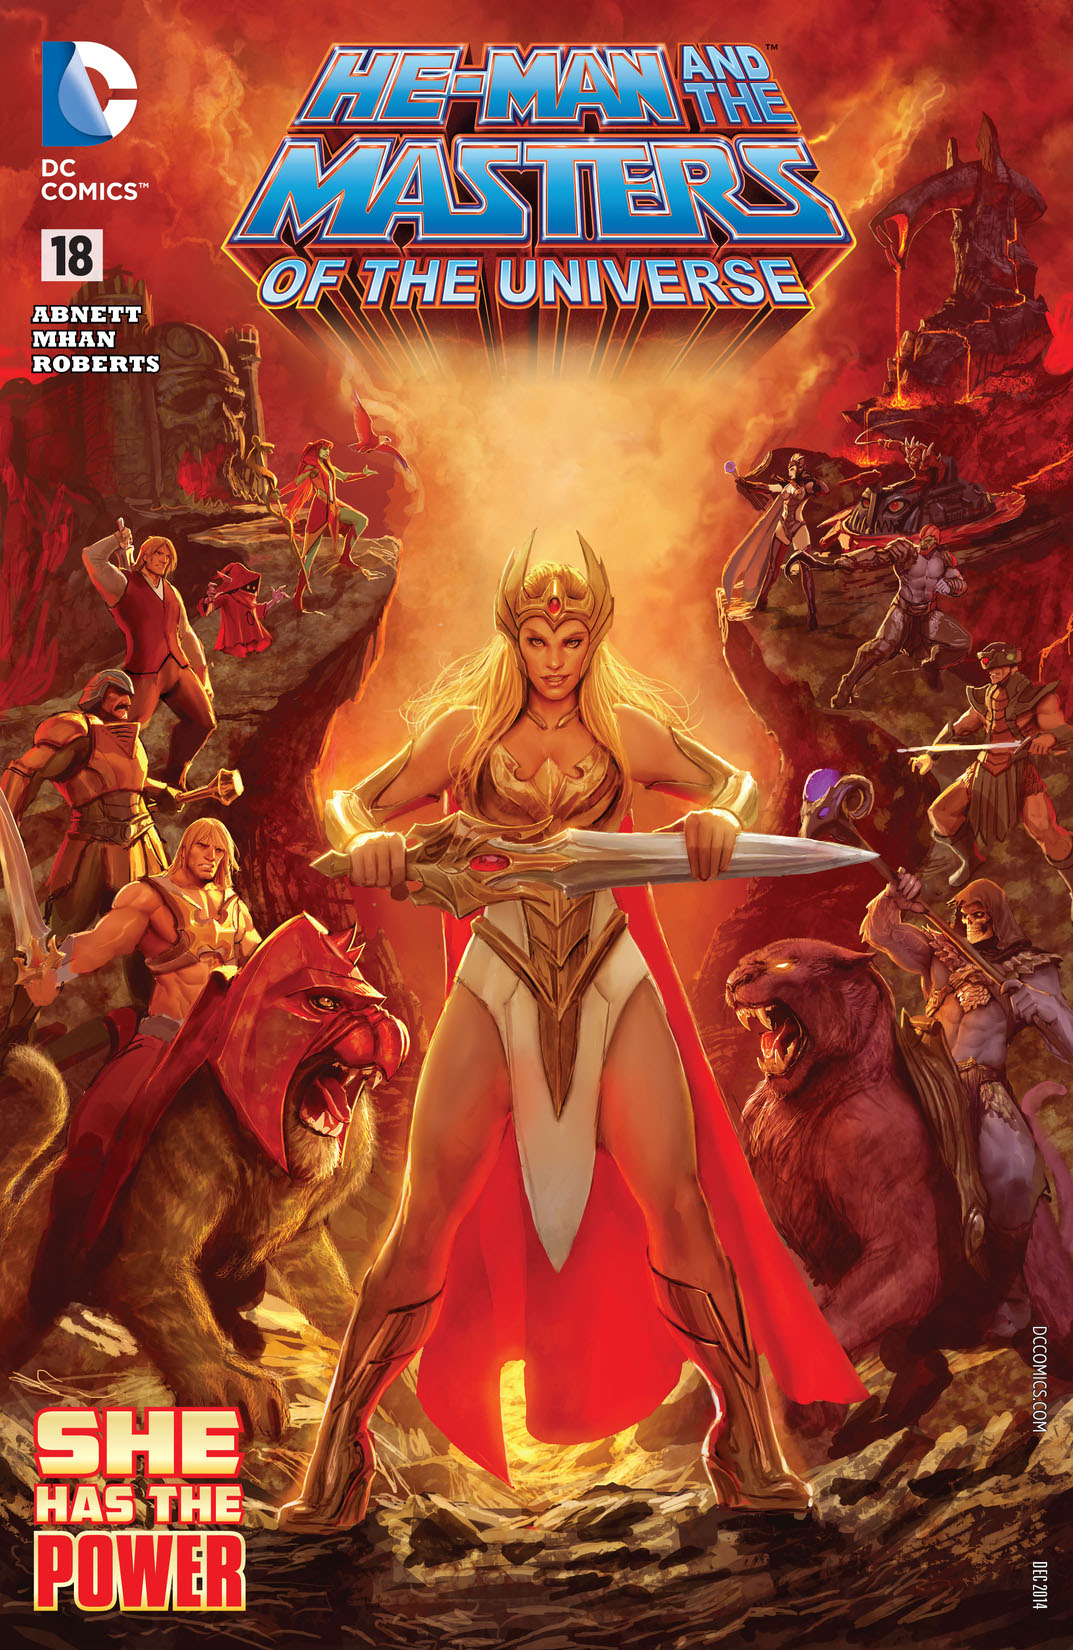 He-Man and the Masters of the Universe (2013-) #18 preview images